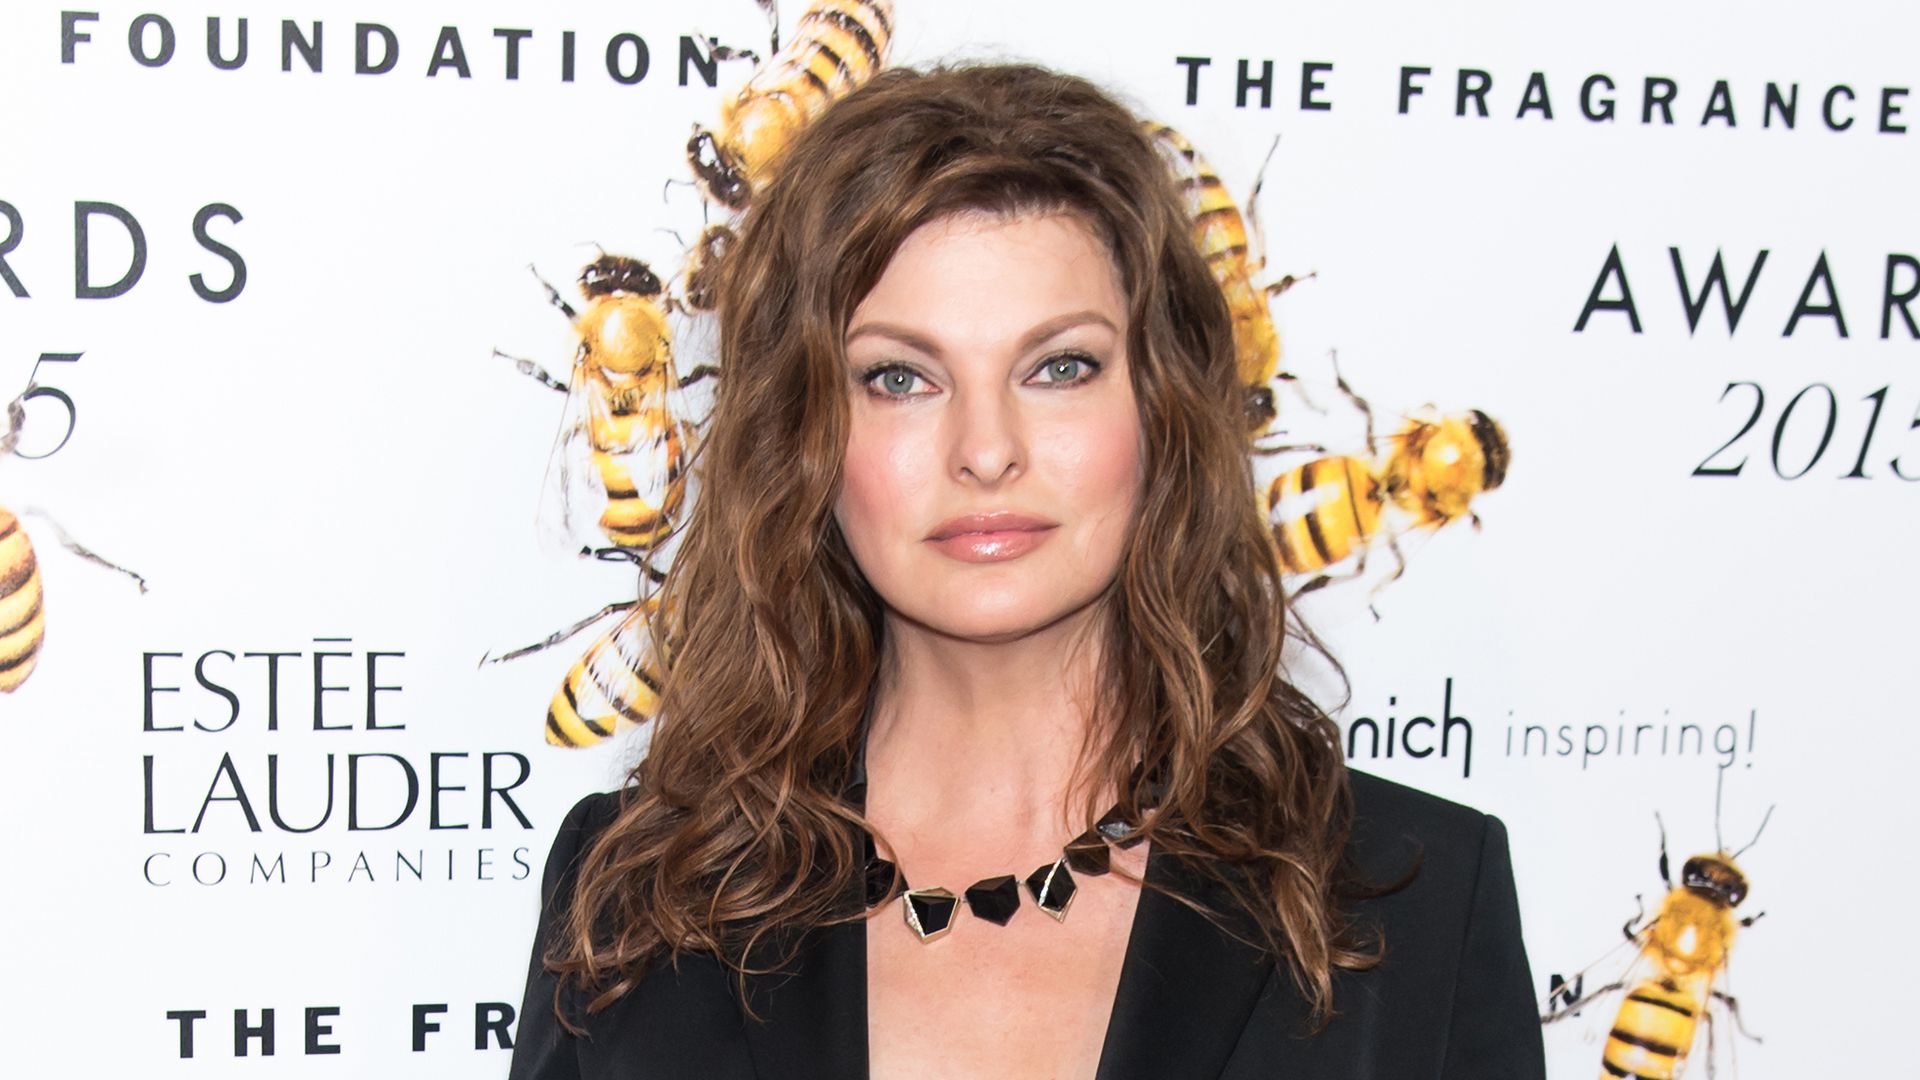 Linda Evangelista attends 2015 Fragrance Foundation Awards at Alice Tully Hall at Lincoln Center on June 17, 2015 in New York City